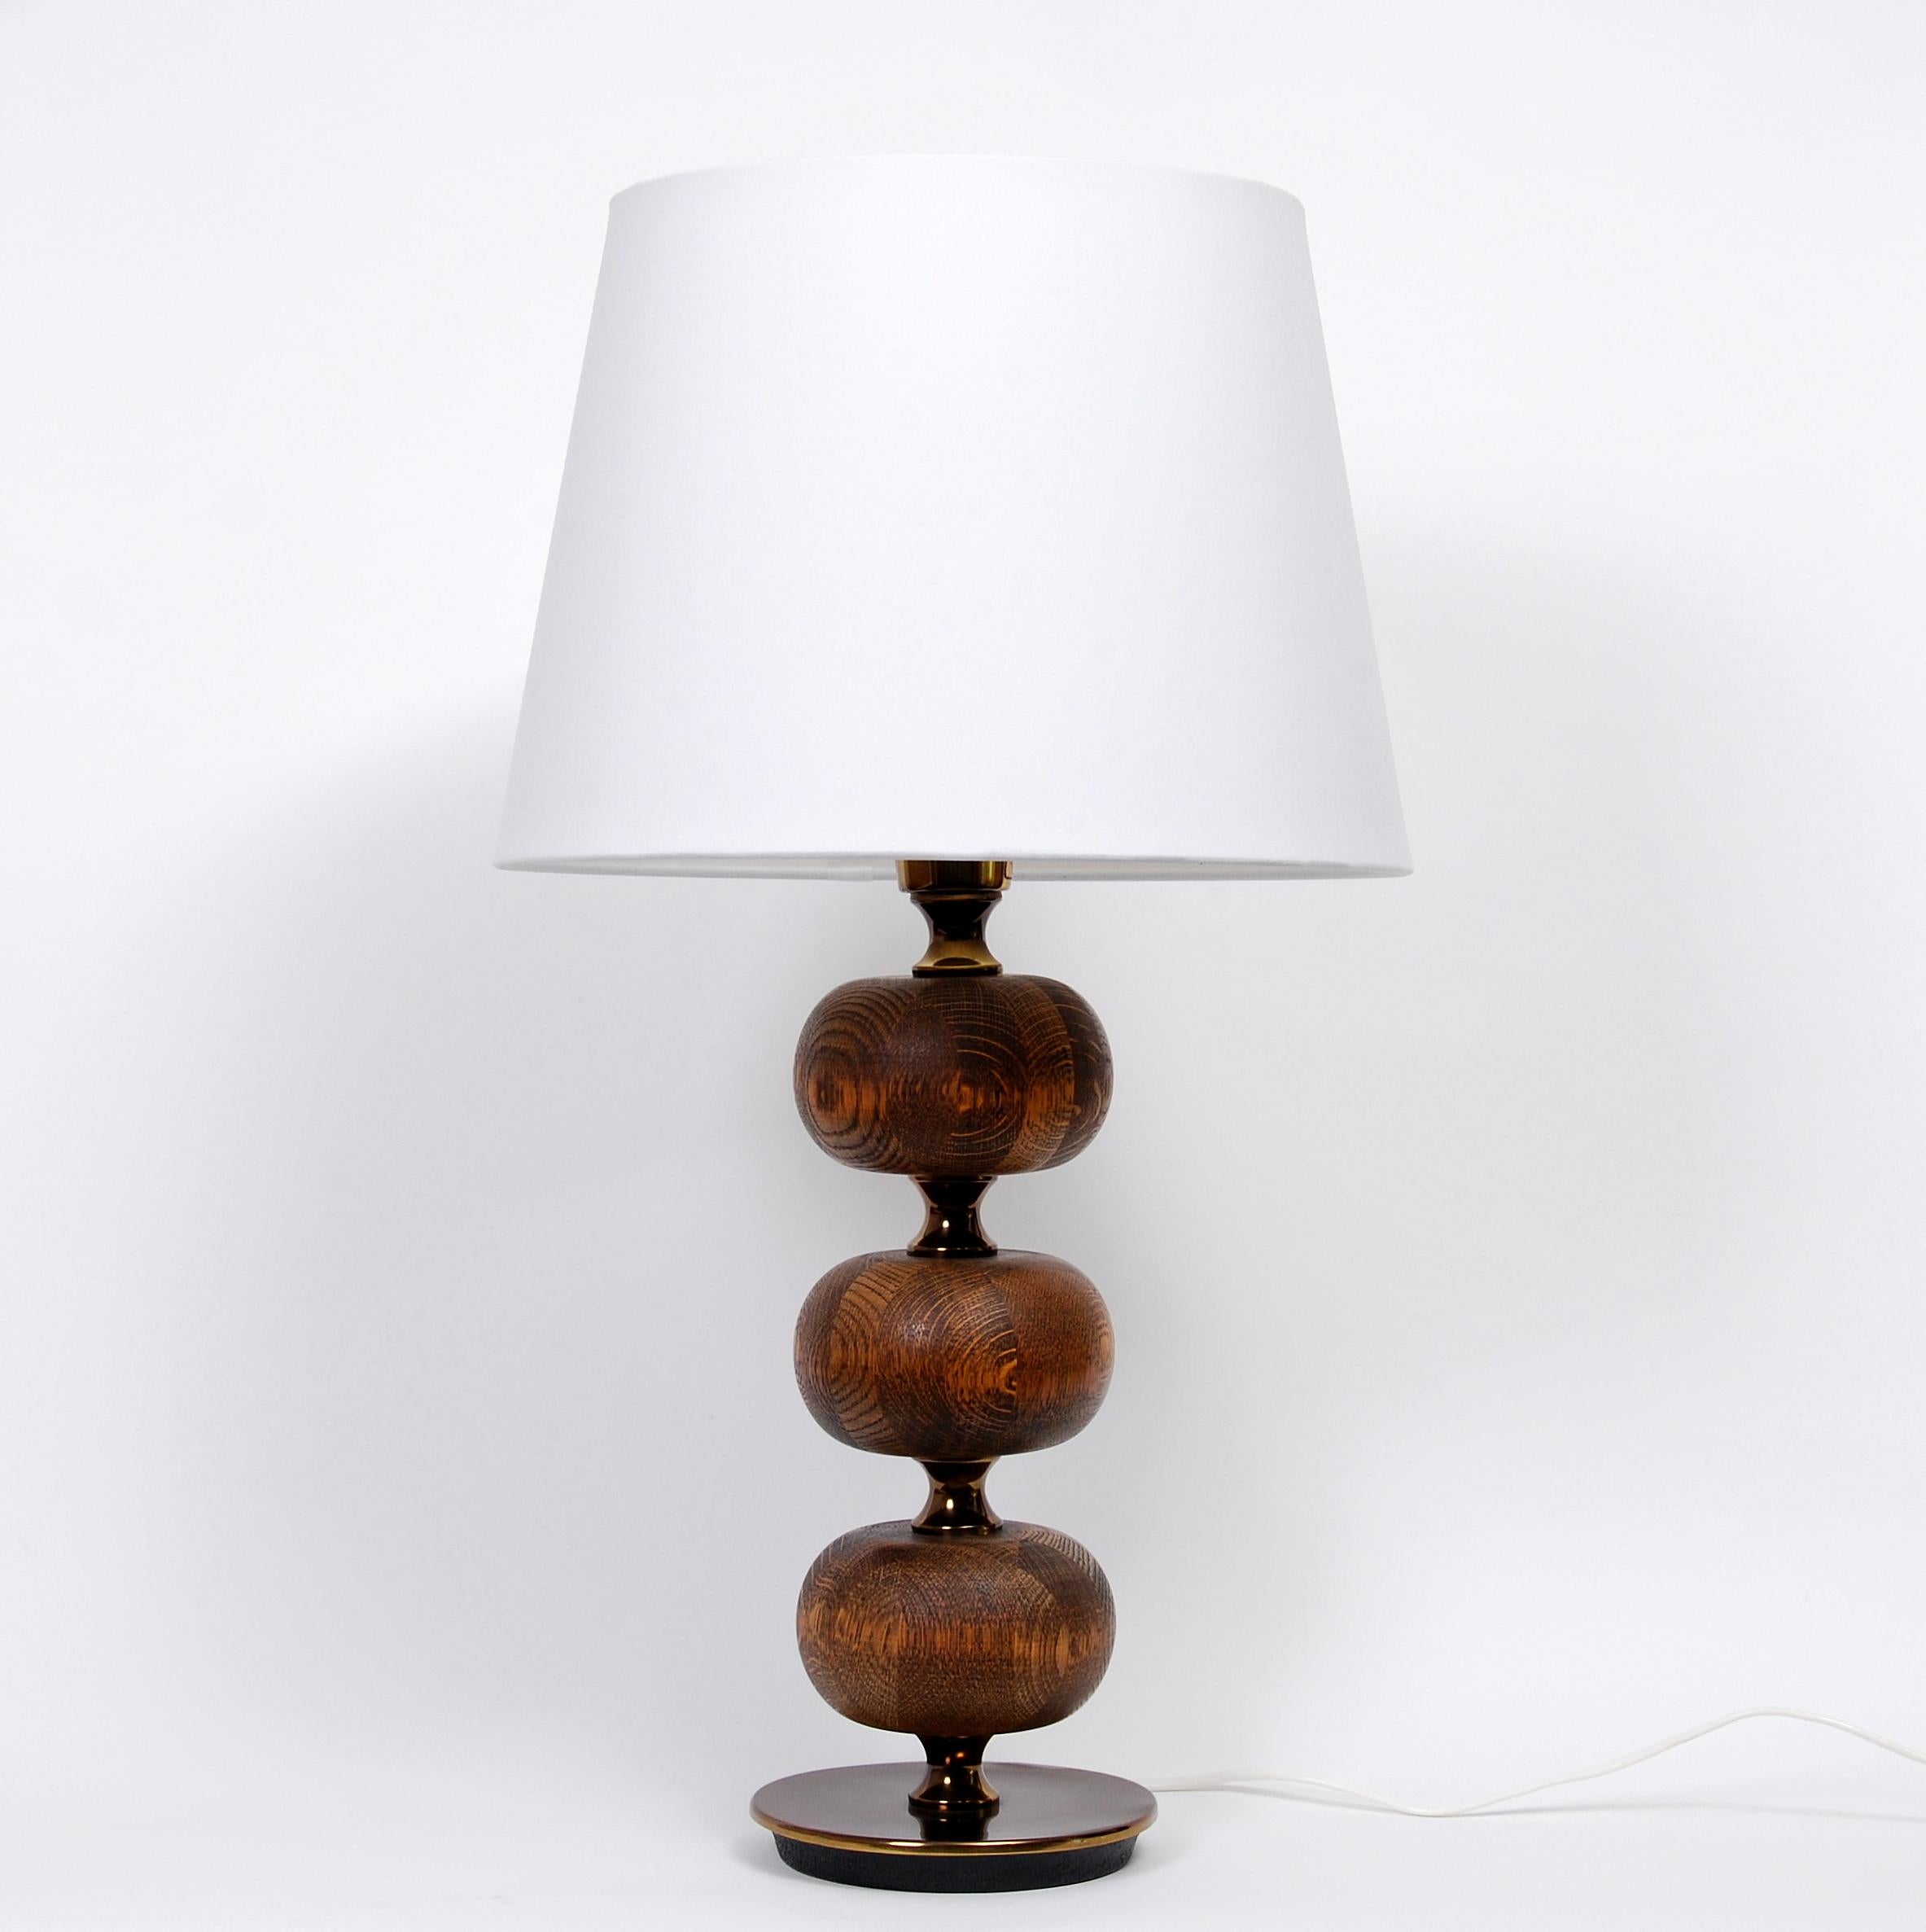 Rare table lamp designed by Henrik Blomqvist for Stilarmatur in Trana°s,Sweden. Featuring a dark brass base with three spheres in solid wenge wood. Please note: We’re selling this table lamp without the shade. Newly rewired.

 